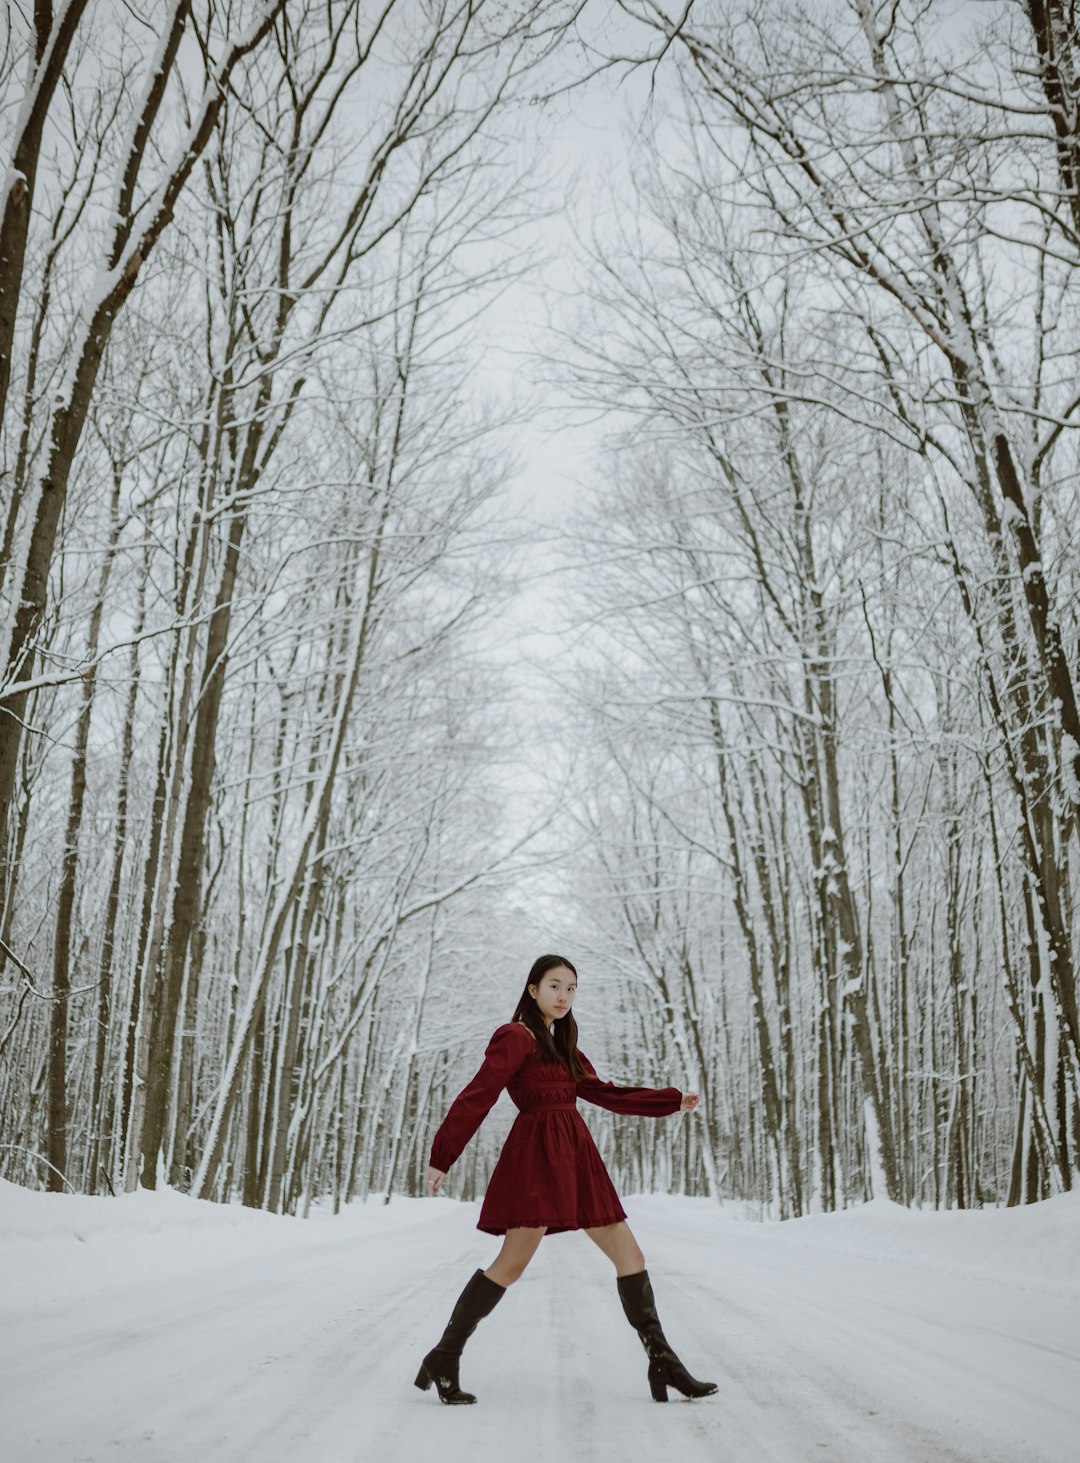 woman in red coat standing on snow covered ground surrounded by bare trees during daytime